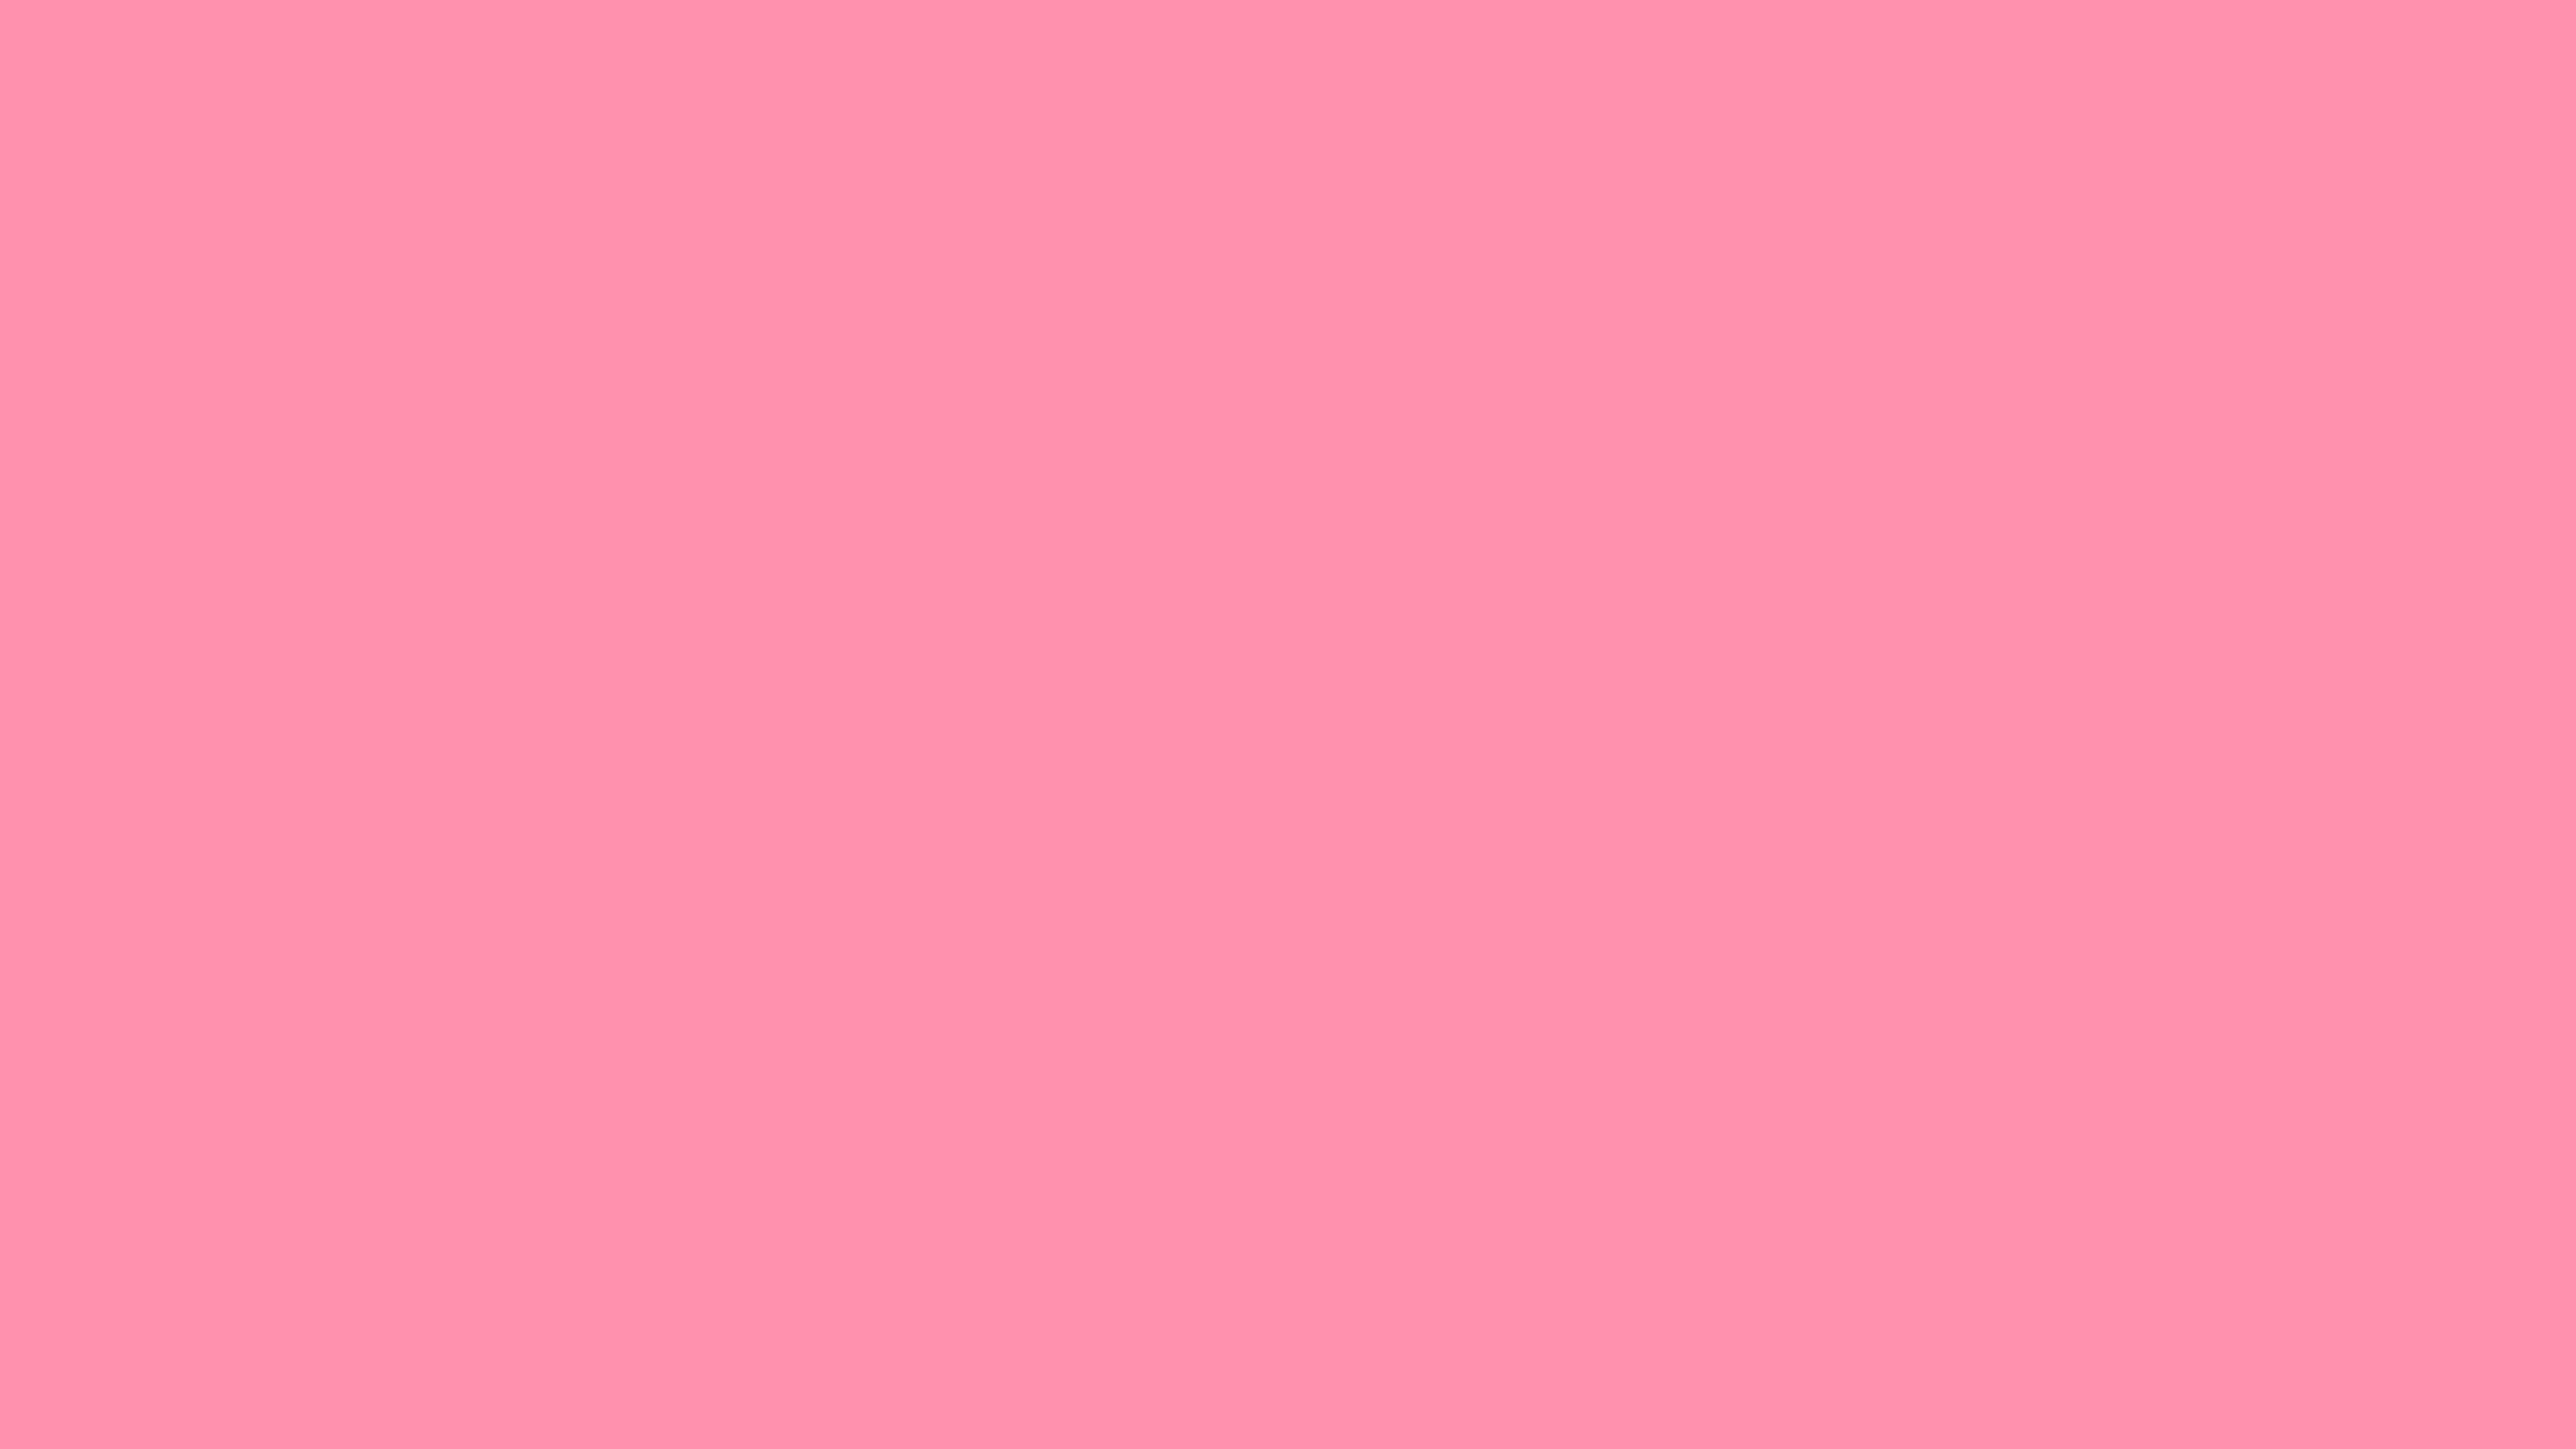 7680x4320 Schauss Pink Solid Color Background